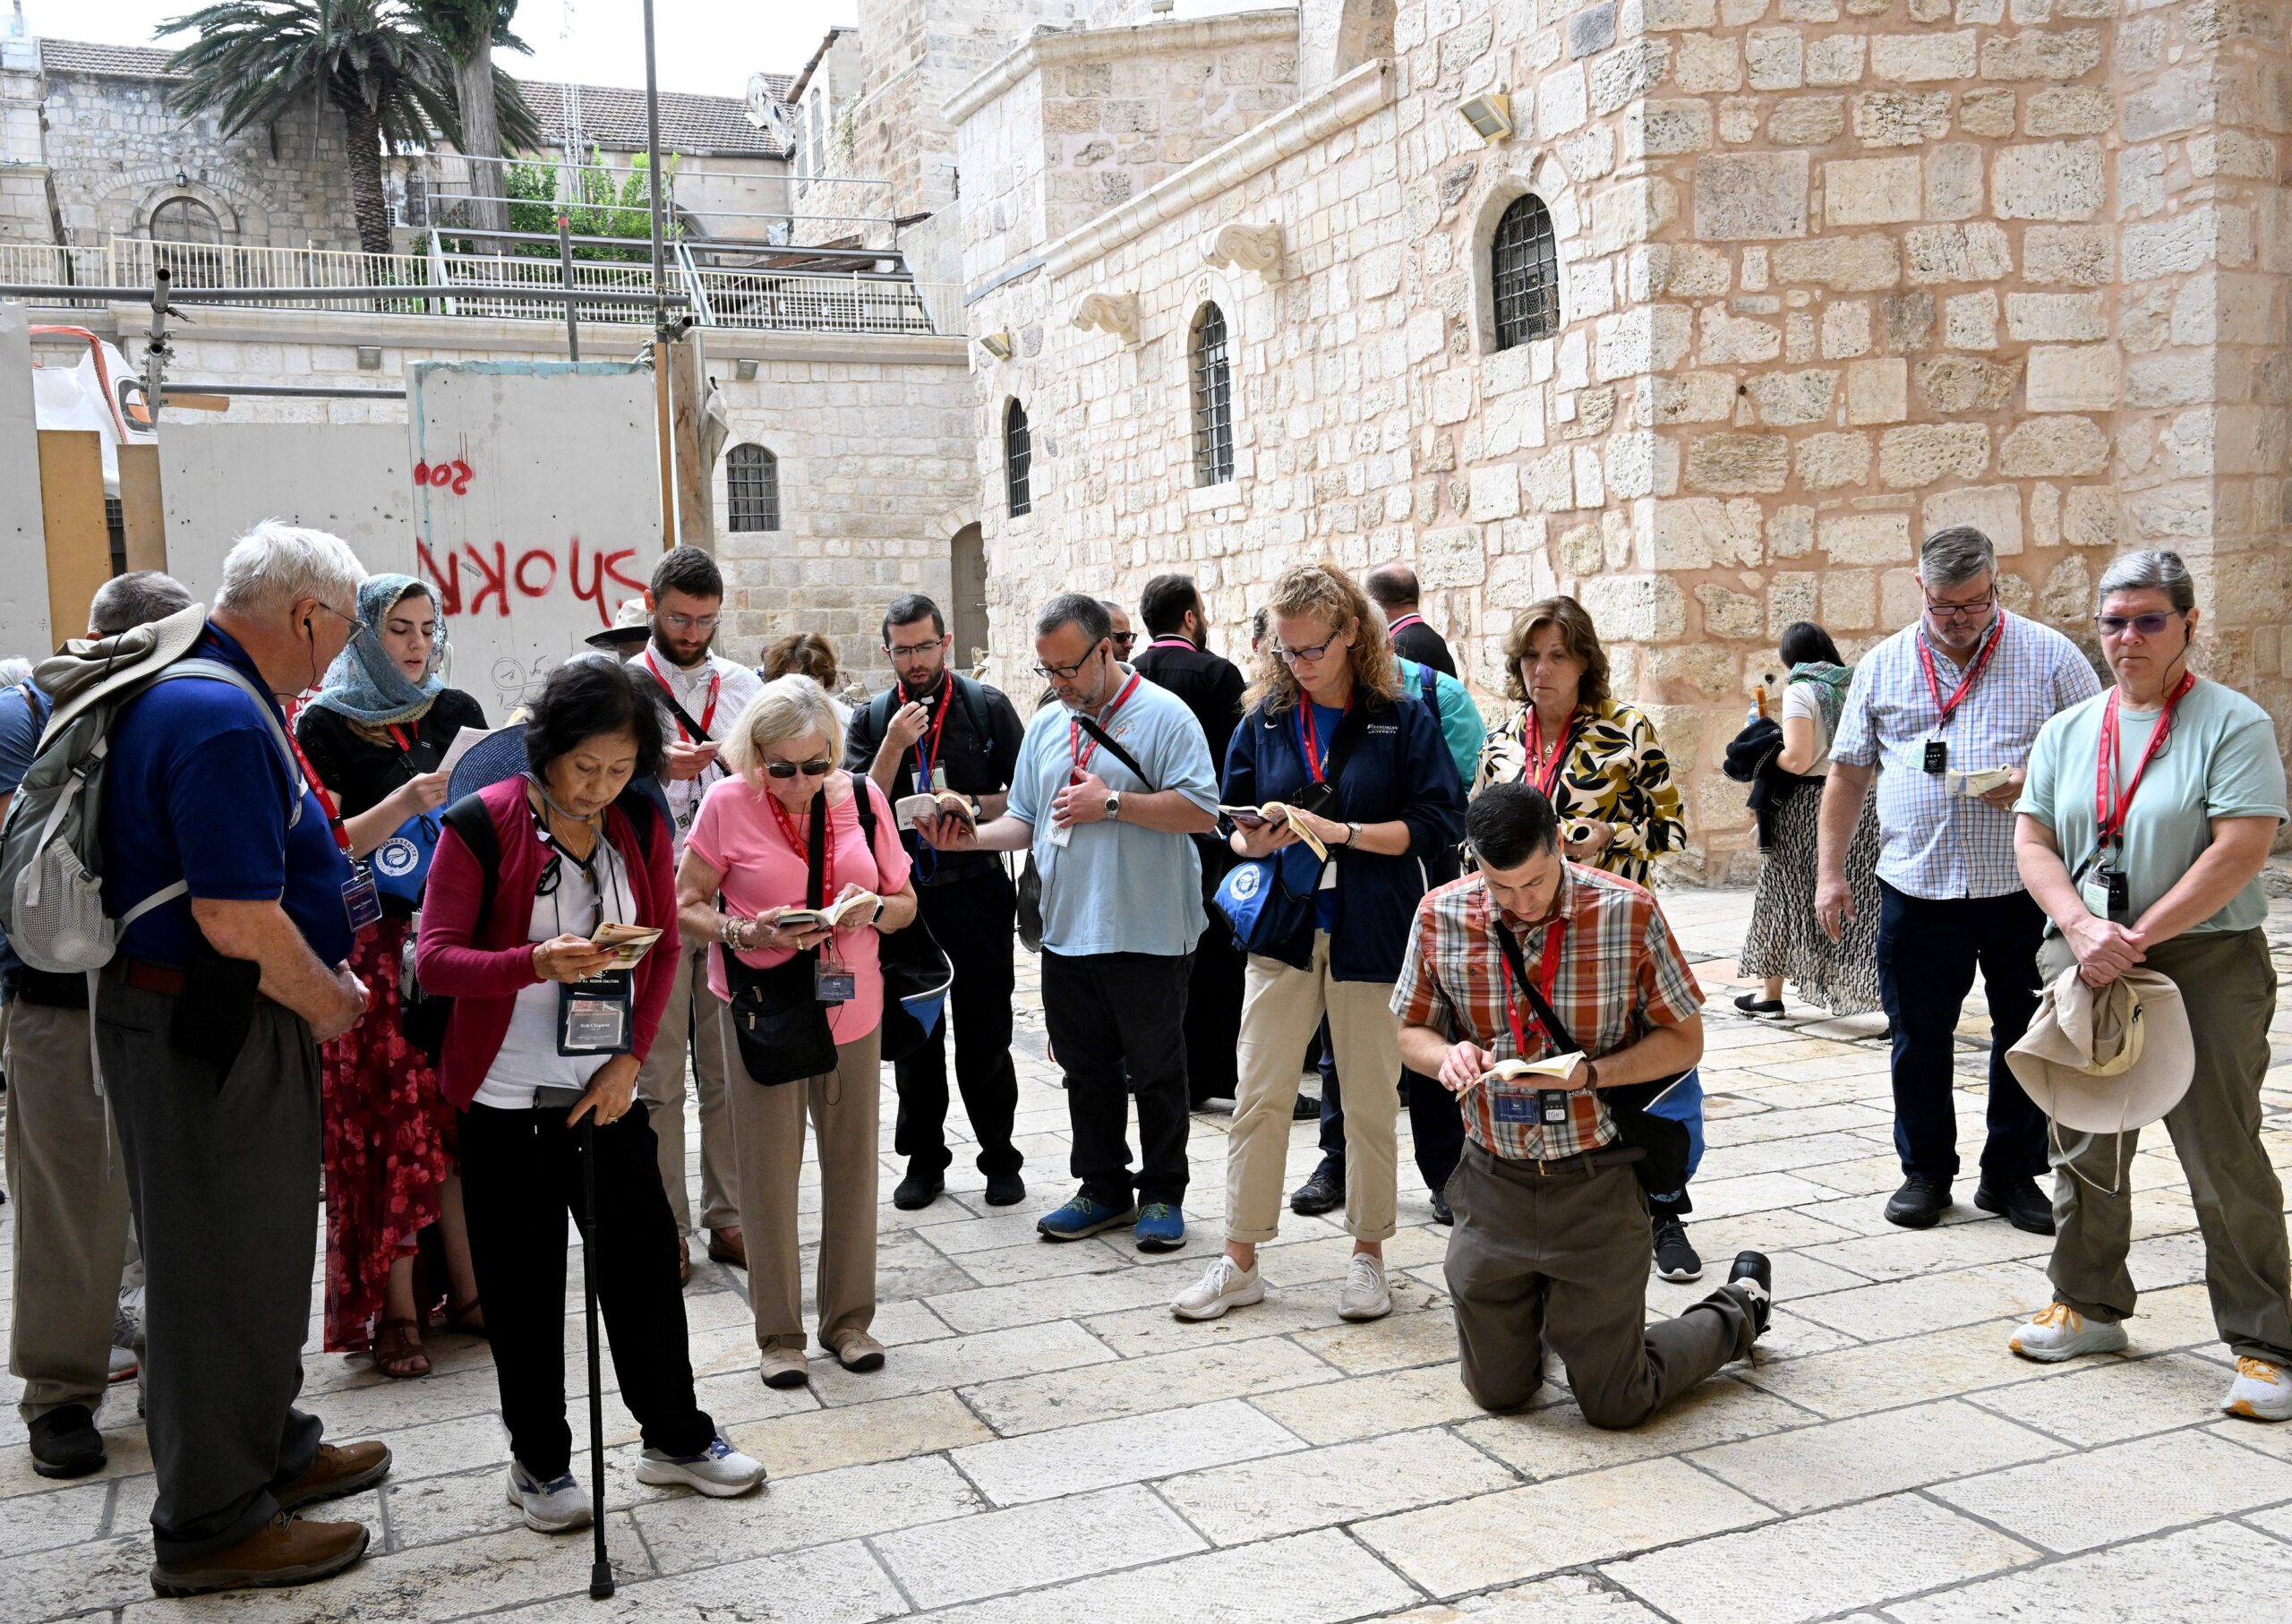 Pilgrims from the Diocese of Arlington, Va., pray in the courtyard of the Church of the Holy Sepulcher in Jerusalem's Old City Oct. 10, 2023. Pilgrims who were in Israel following a surprise terrorist attack by Hamas against civilian communities in southern Israel Oct. 7 lit candles and said prayers of peace at the church as fighting continued in southern Israel. (OSV News photo/Debbie Hill)